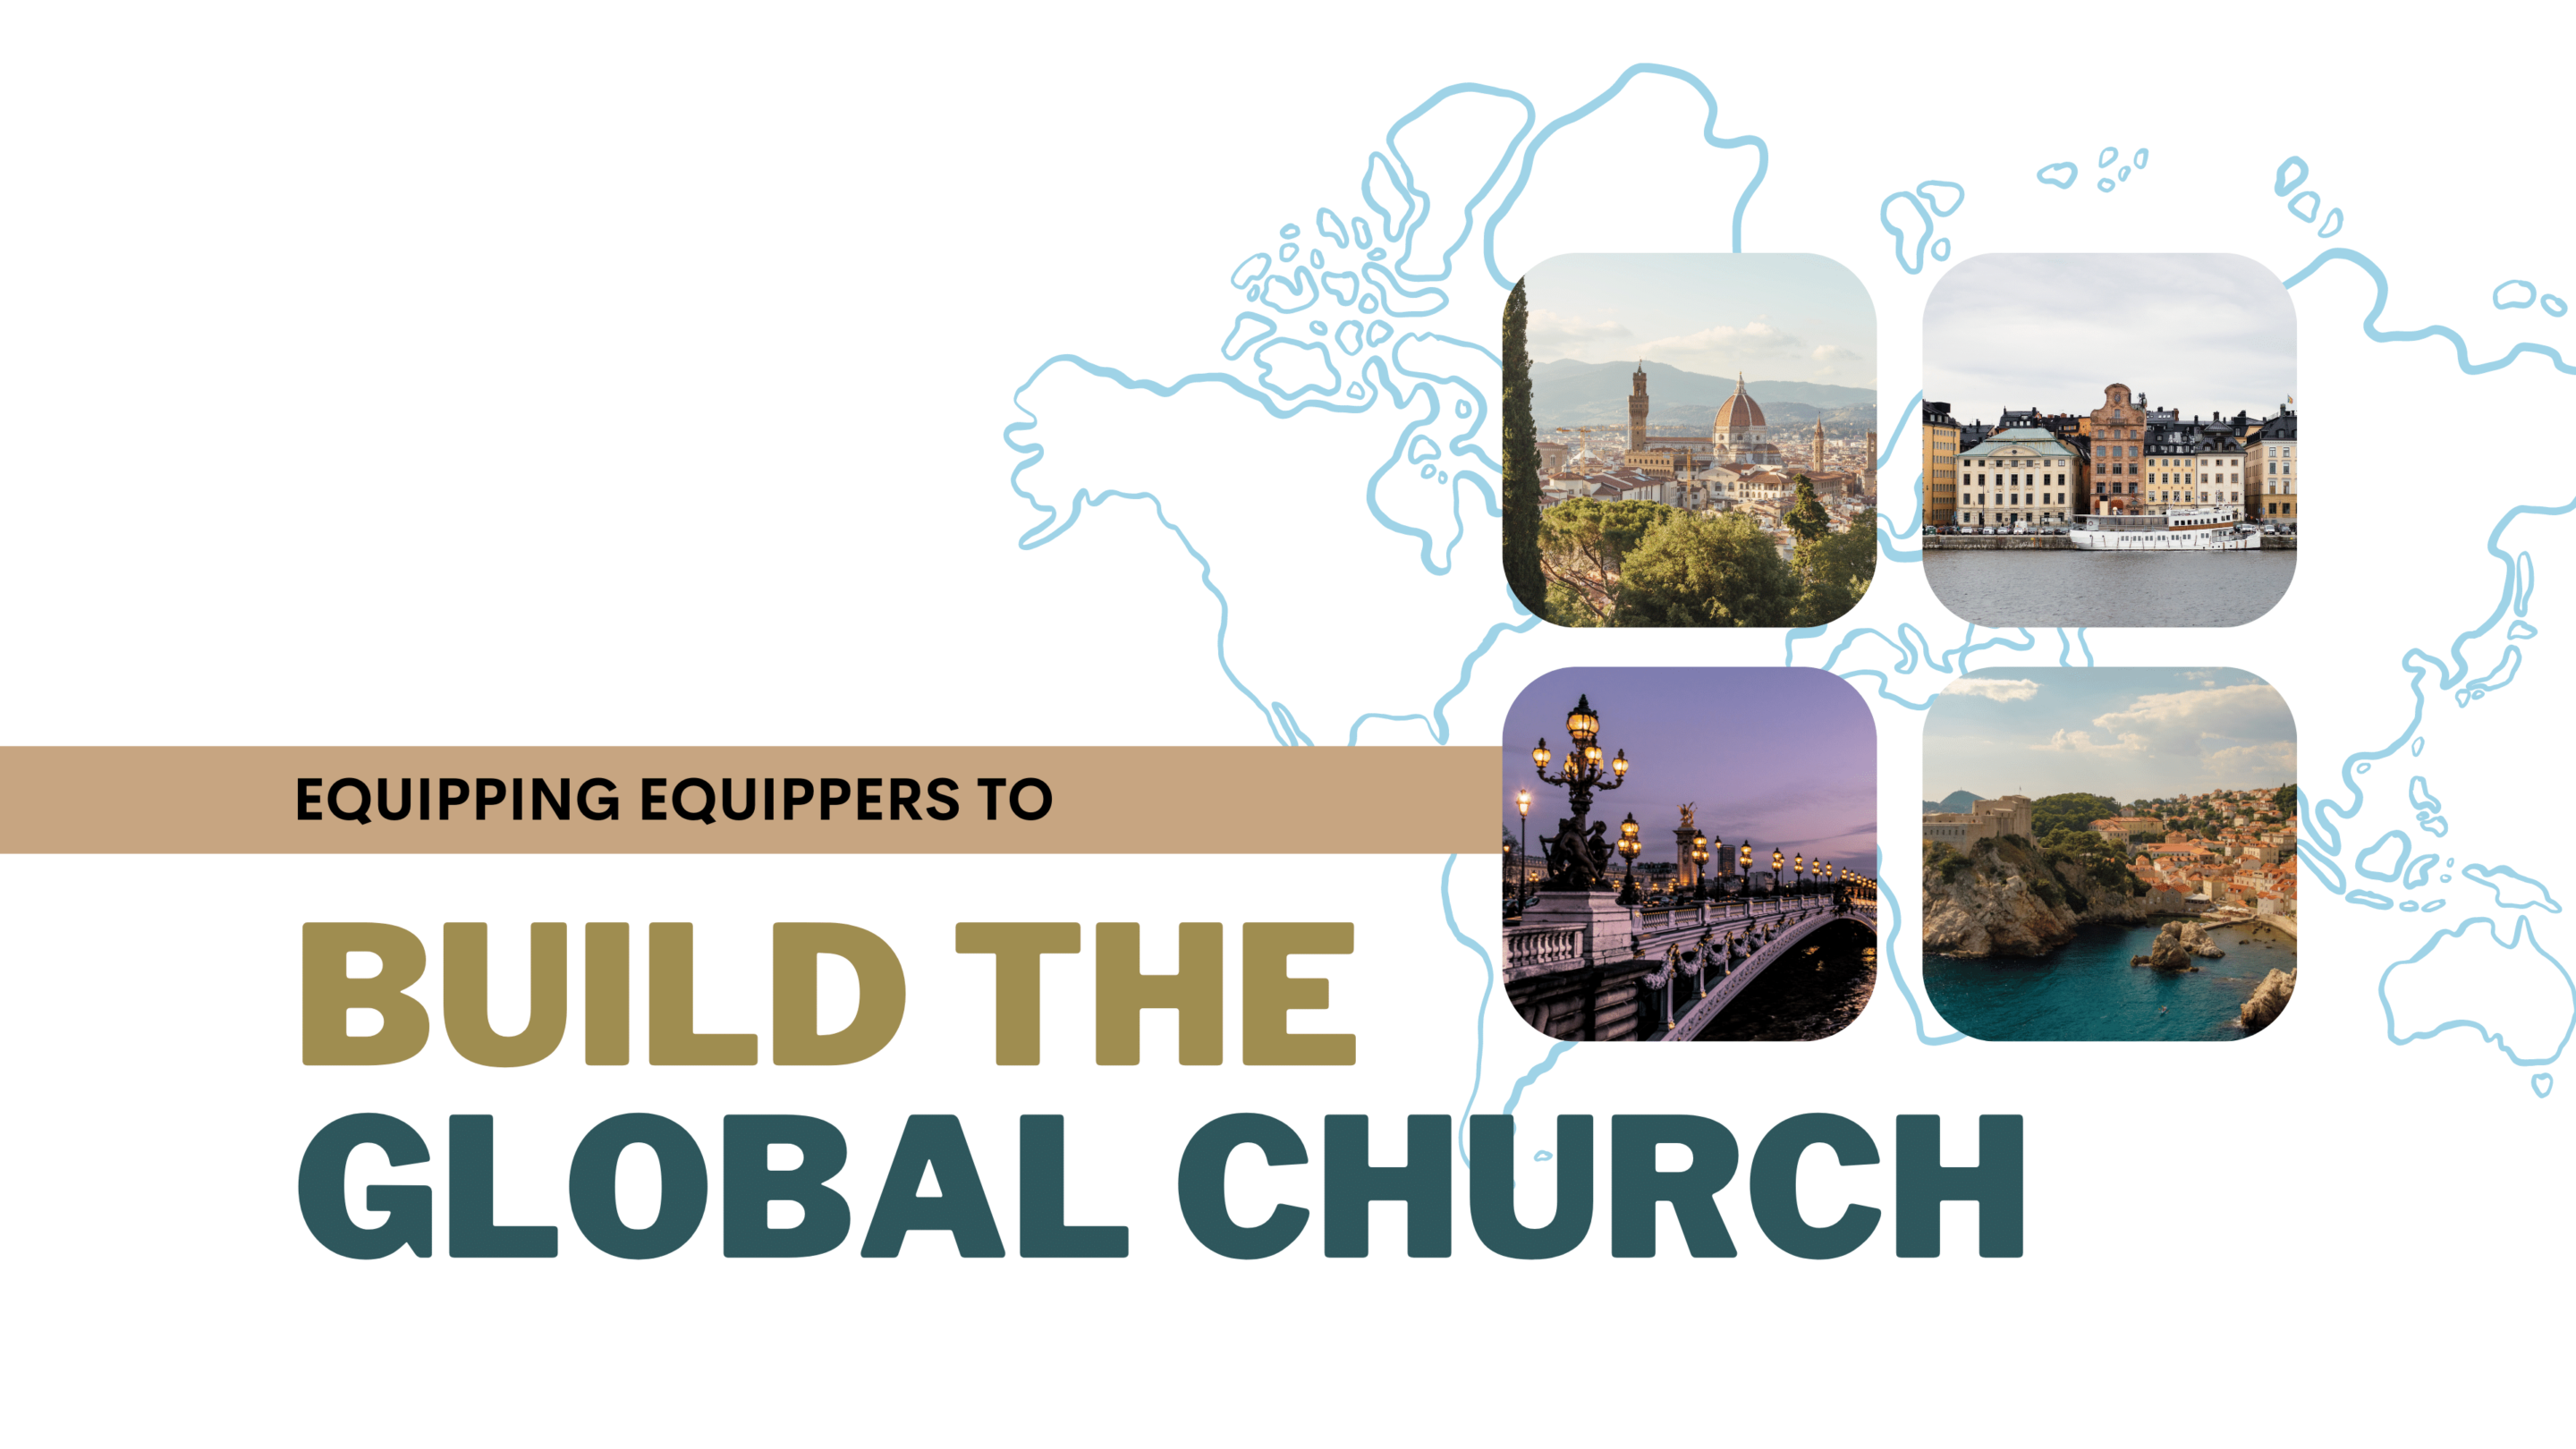 build-the-global-church_the-church-revitalization-podcast_header-image